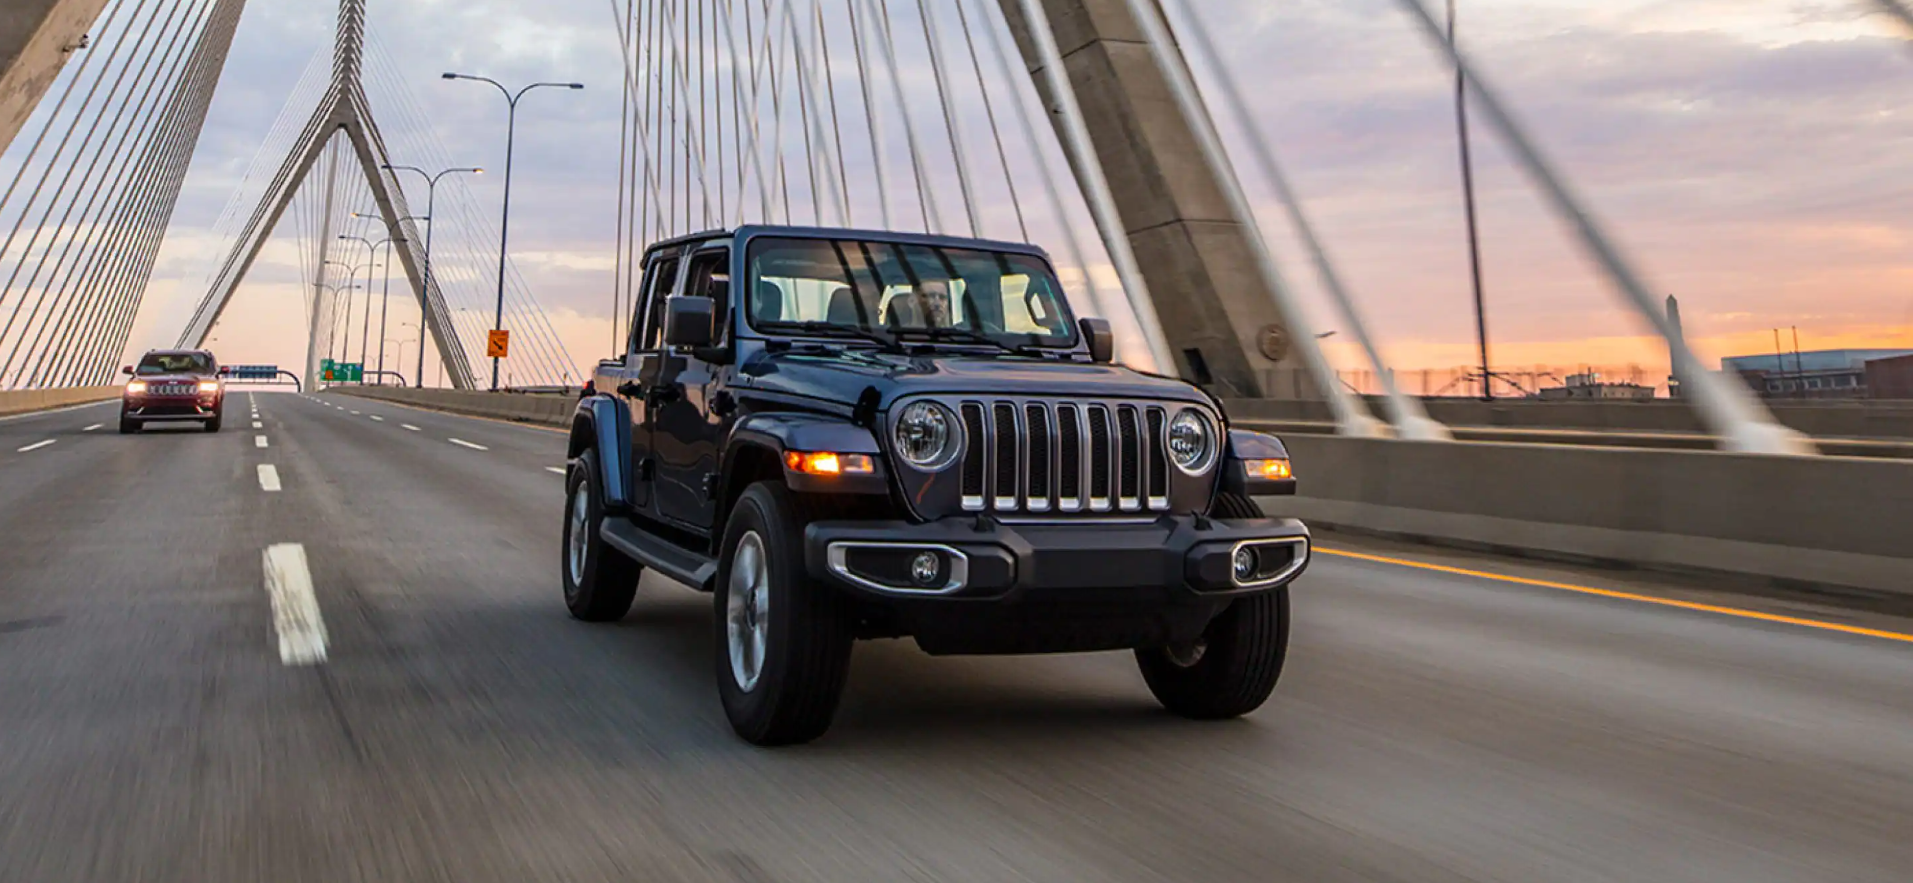 2023 Jeep Wrangler Unlimited for Sale near Wabash, IN - Button Chrysler  Dodge Jeep Ram